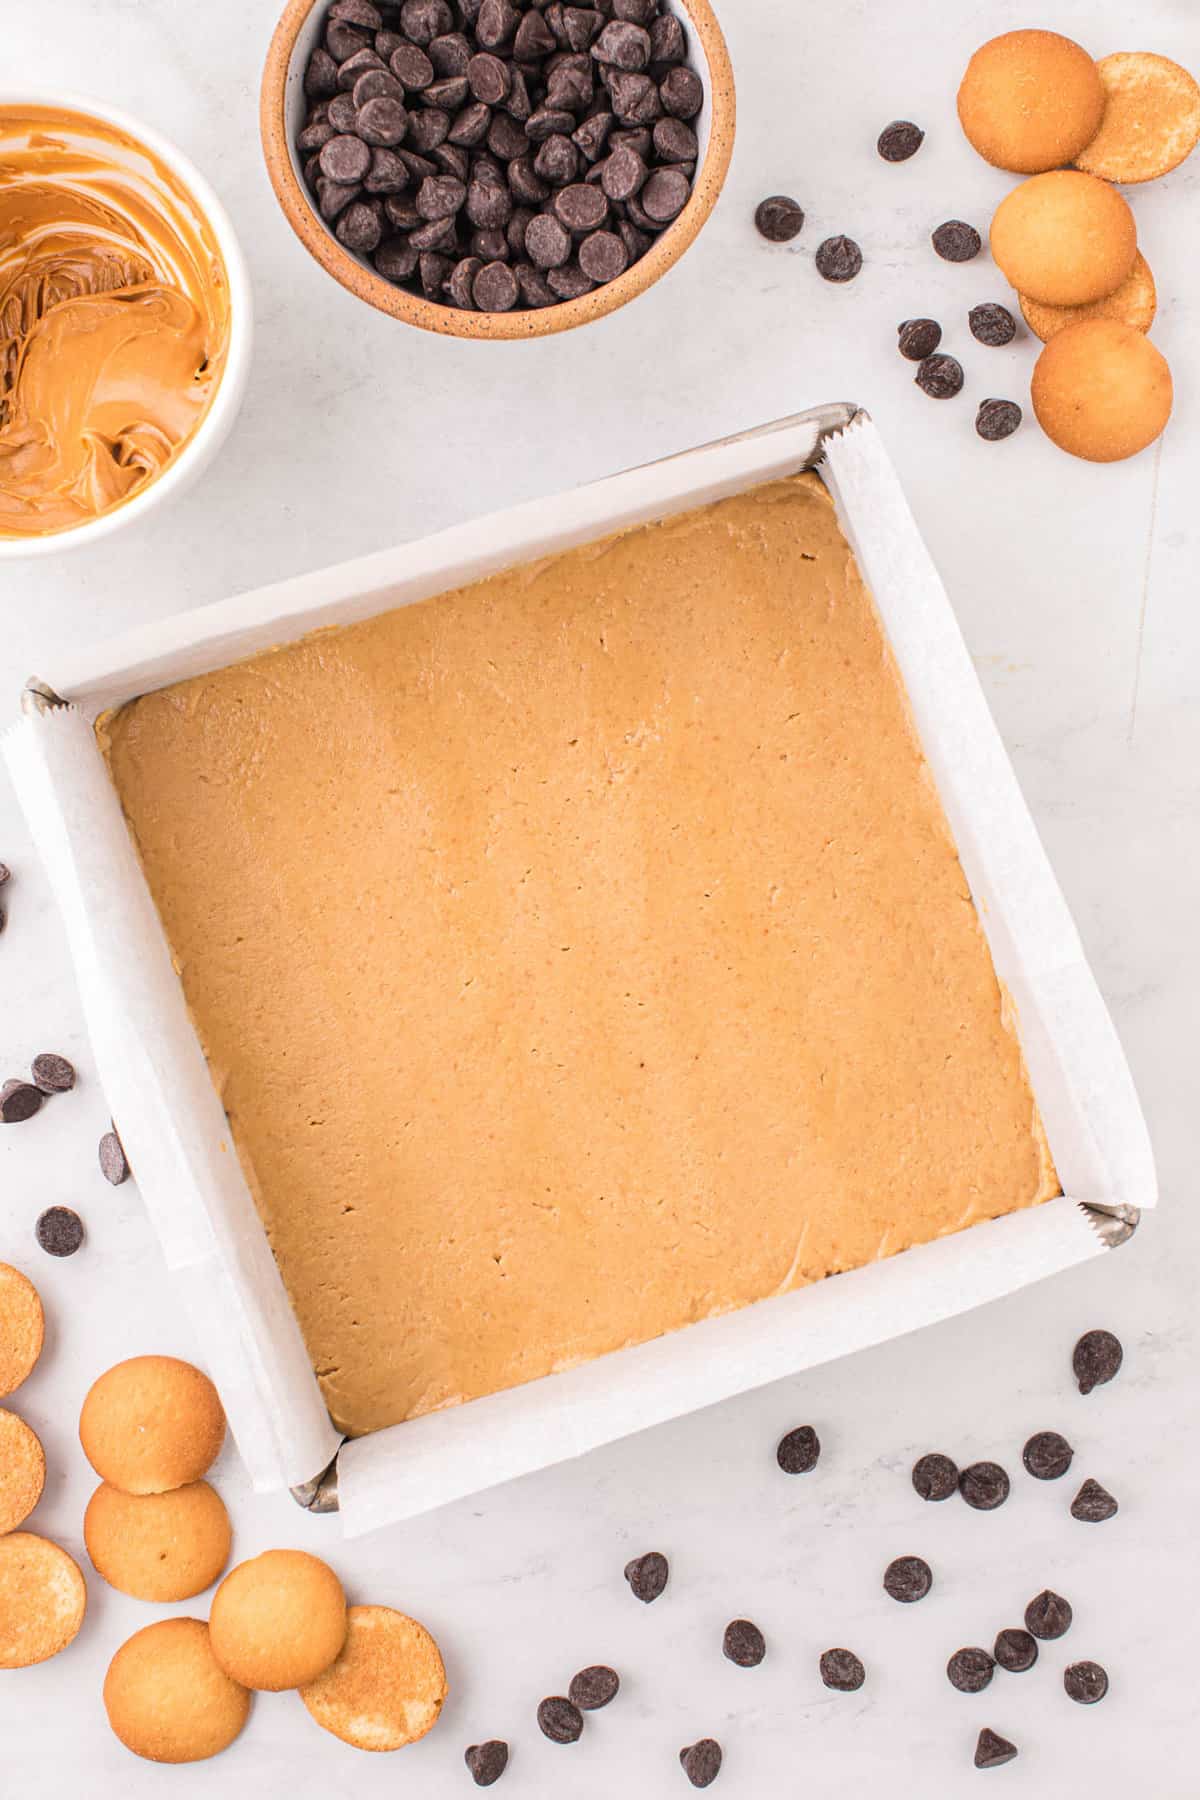 Pressing Peanut Butter Mixure into Parchment-Lined Square Pan for Chocolate Peanut Butter Bars